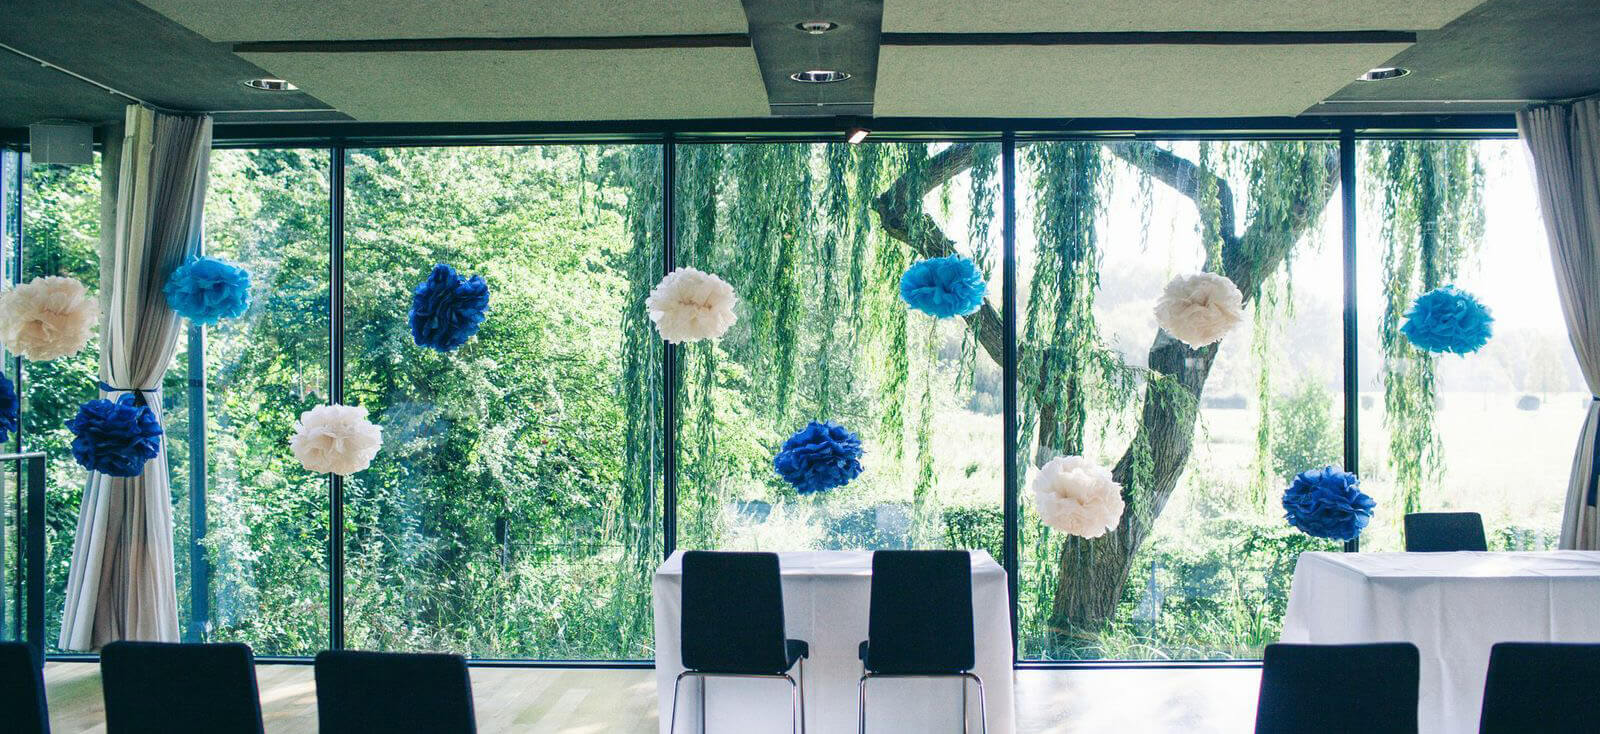 pom pom at ceremony river and rowing museum henley wedding venue gay wedding guide